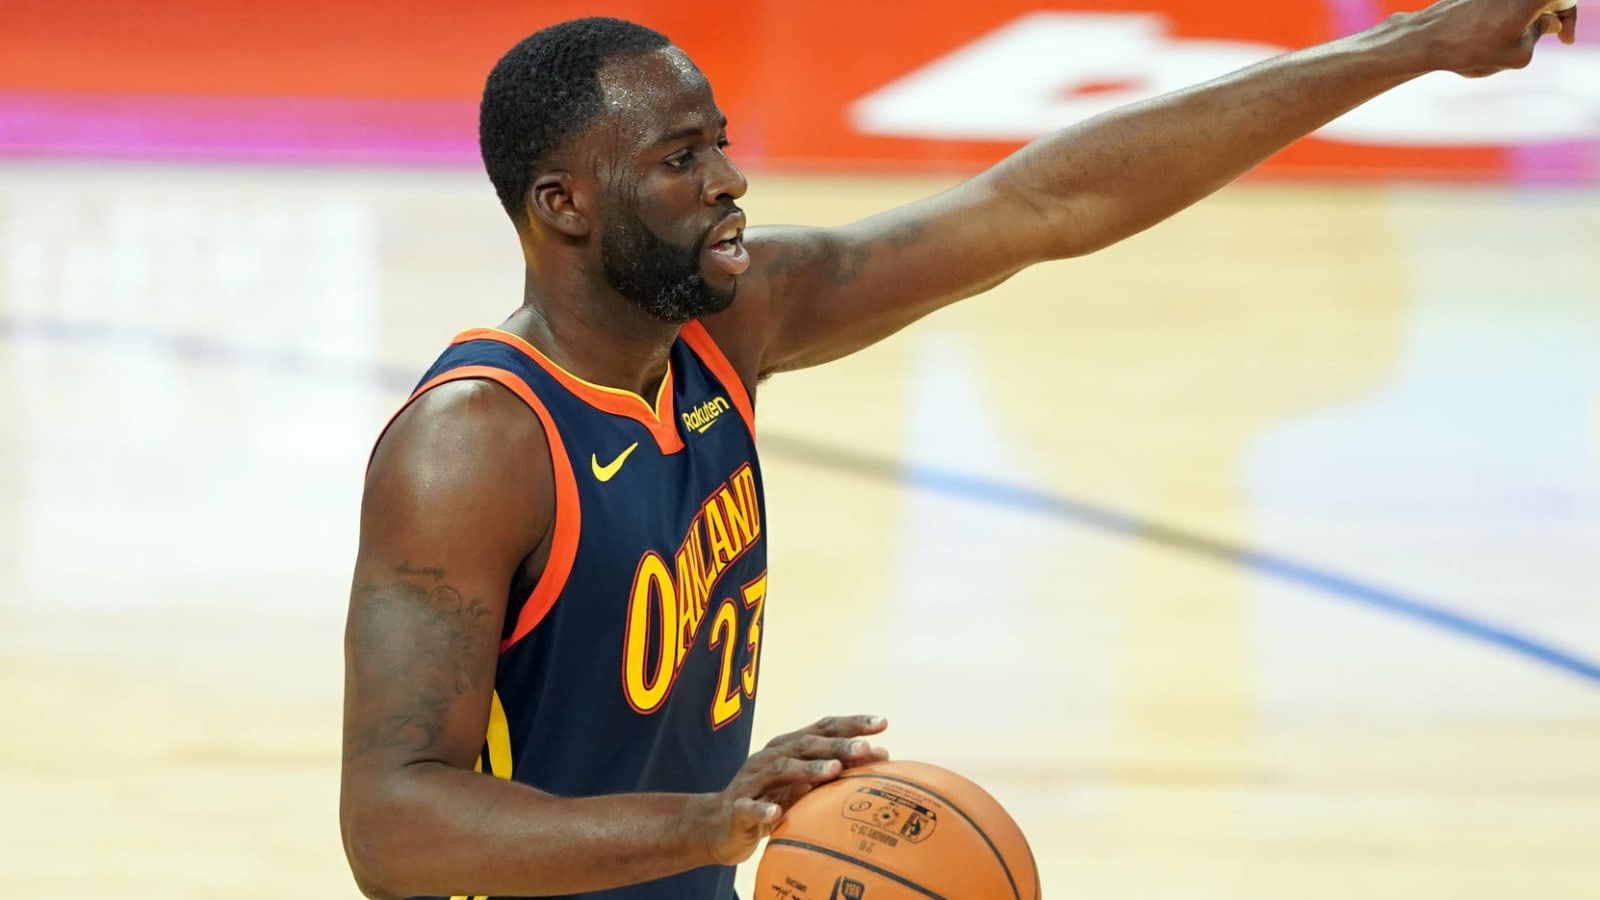 Draymond Green has funny quote about his son rebounding for Steph Curry